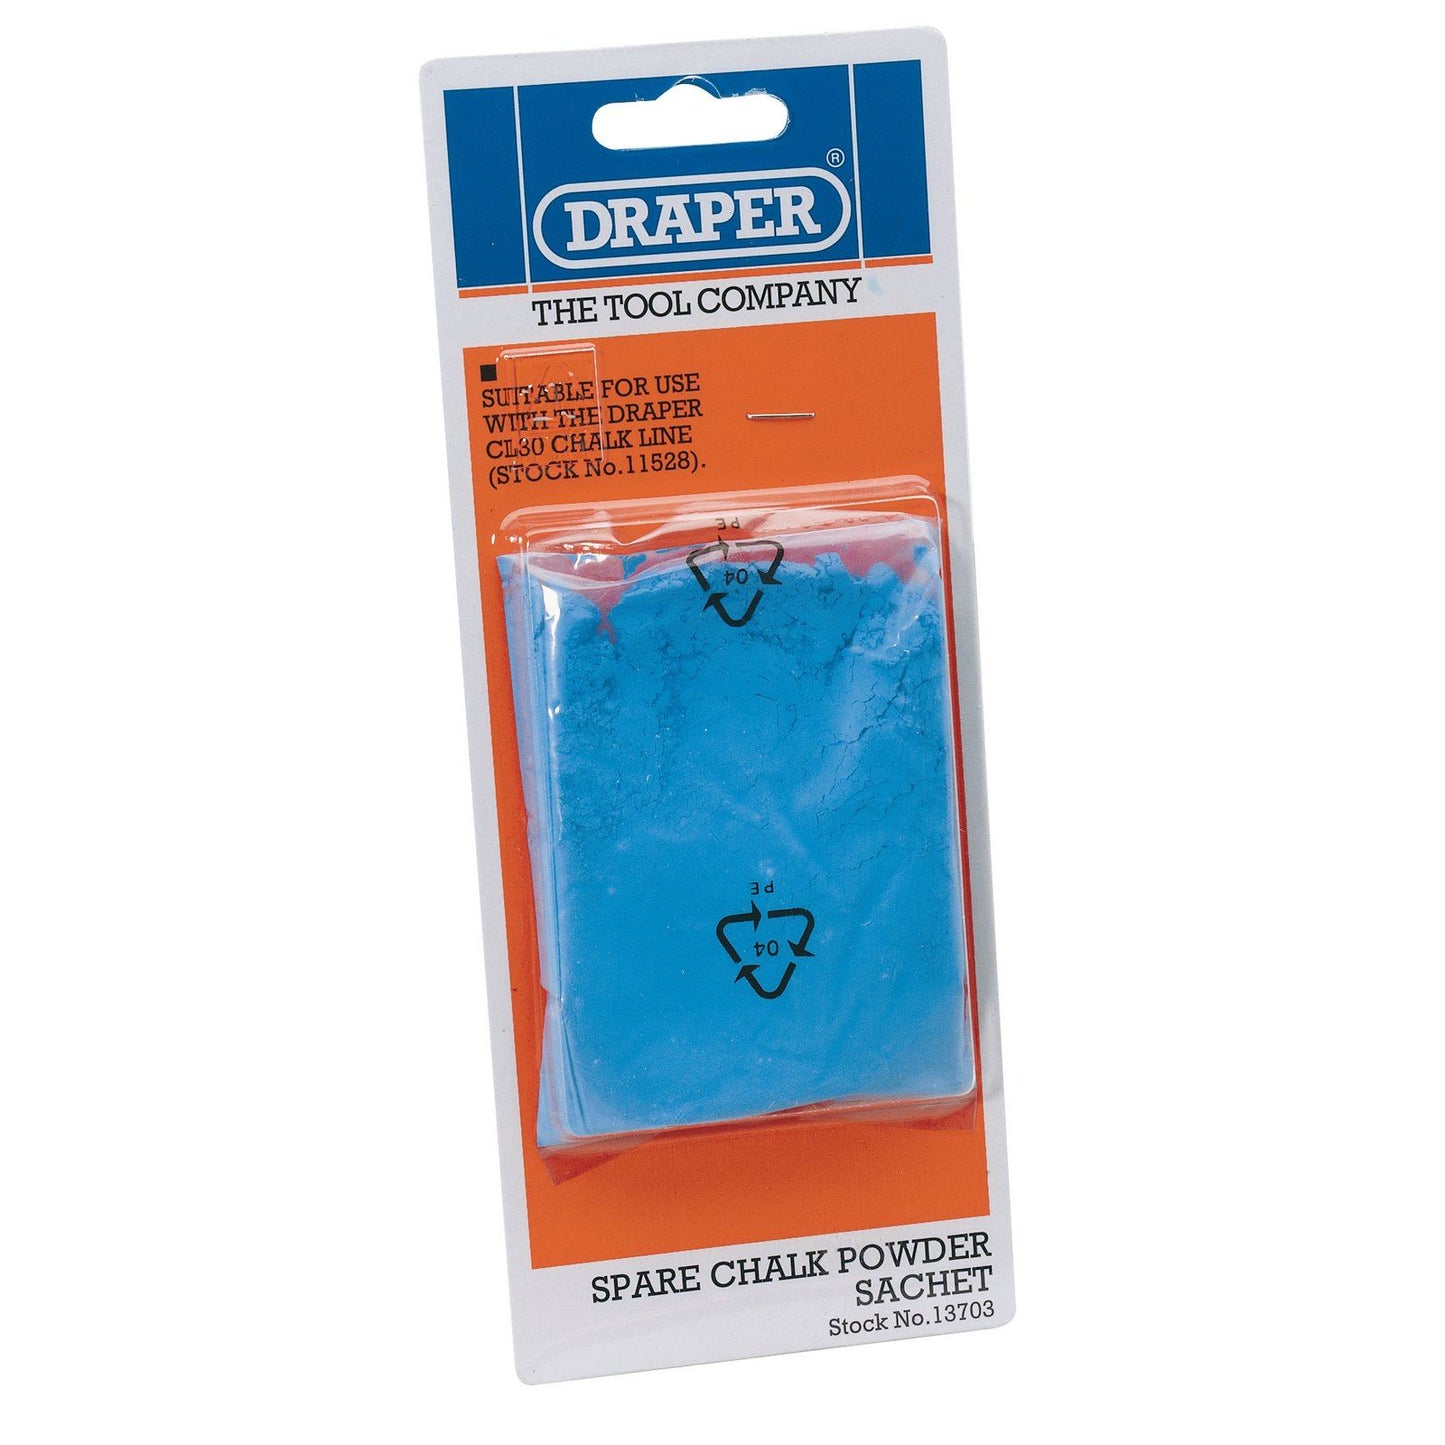 Draper Spare Chalk for 86921, 10742, 10871 and 11528 Chalk Lines - 13703